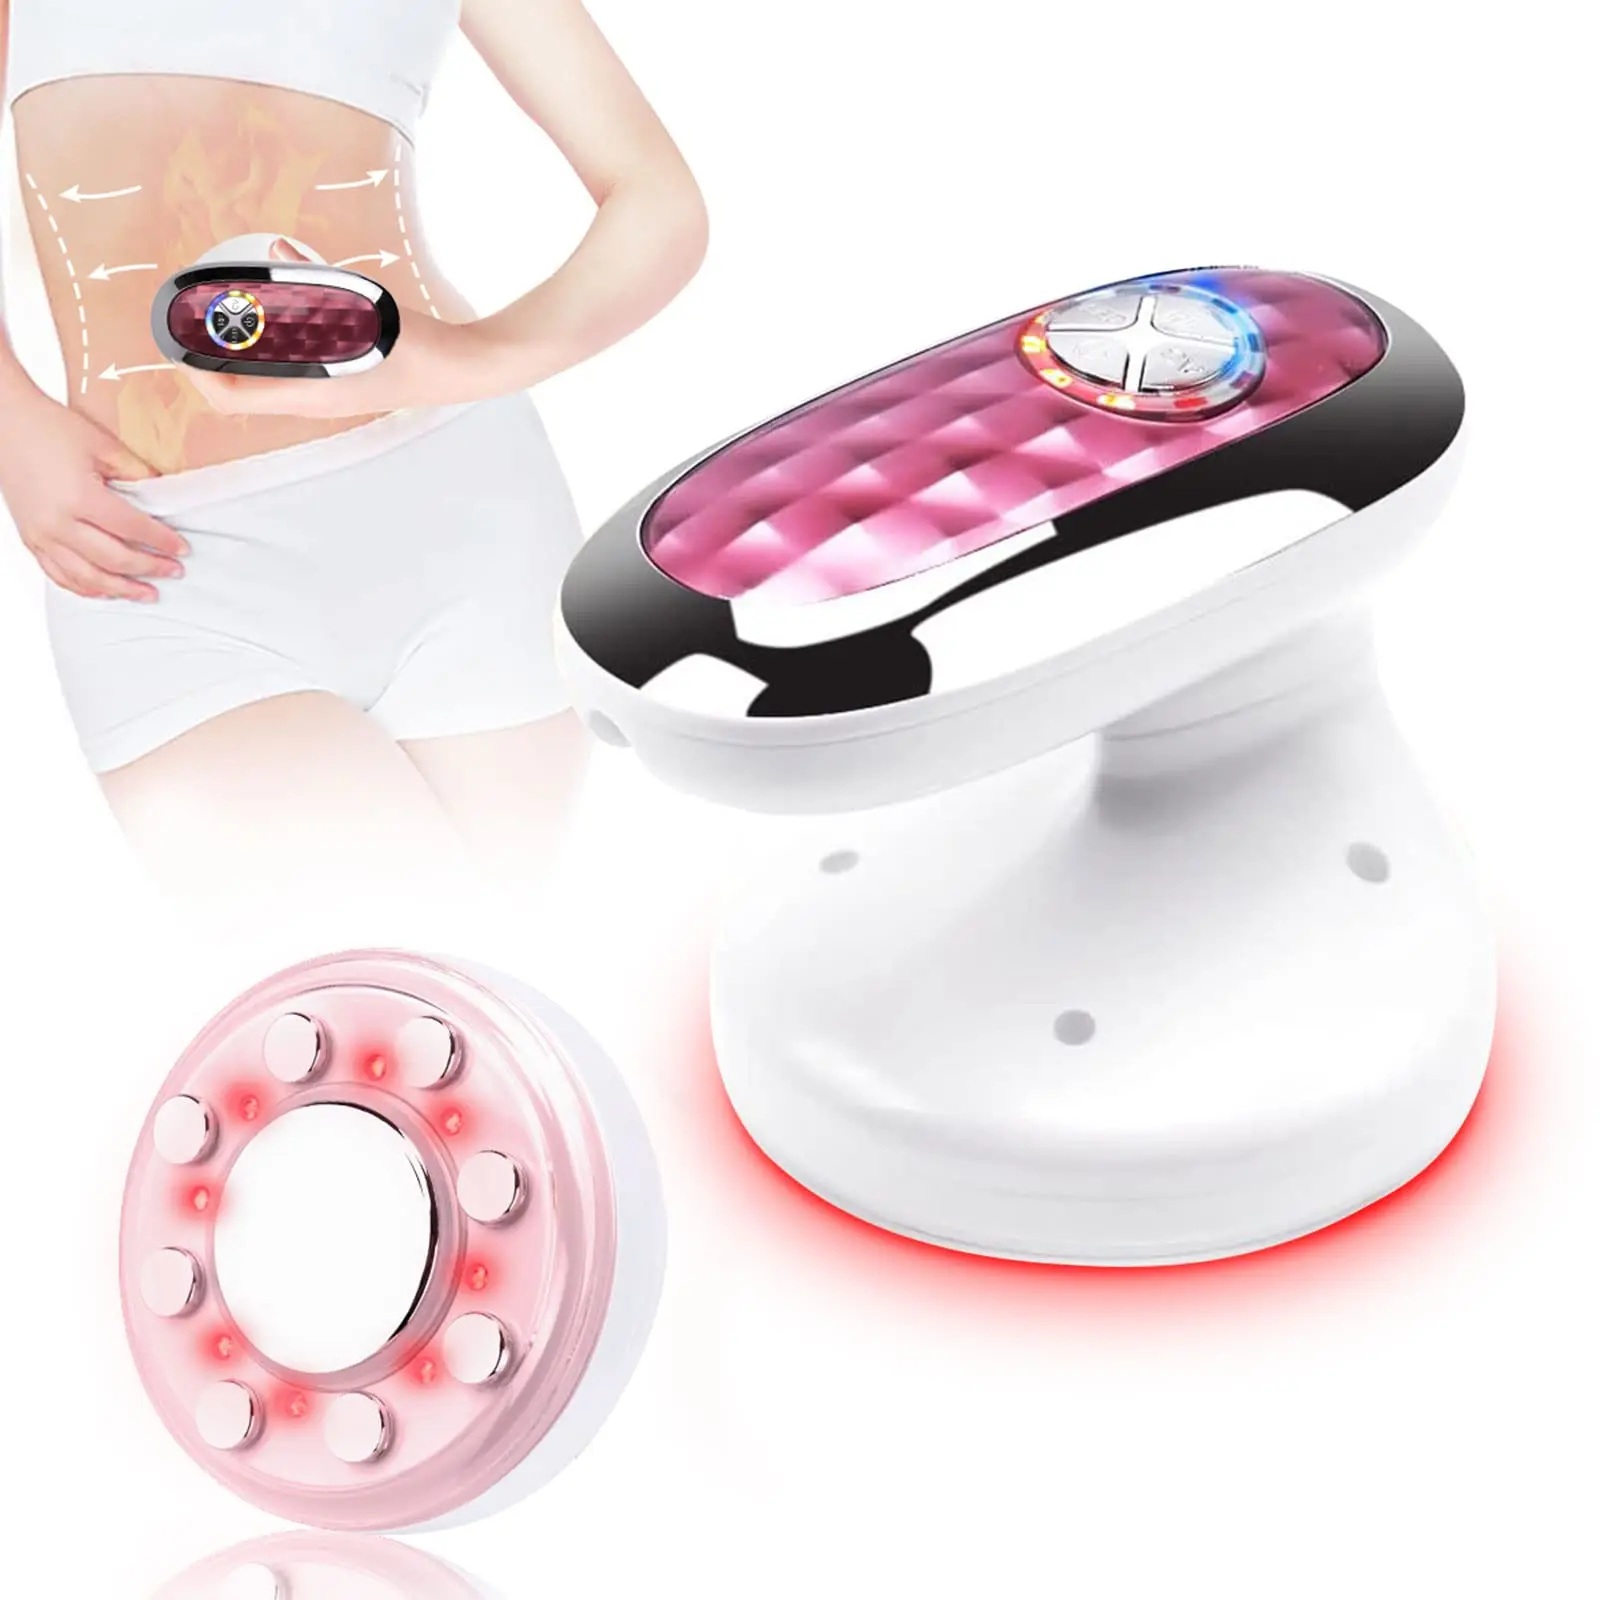 Household beauty instrument for slimming, vibrating and fat removing